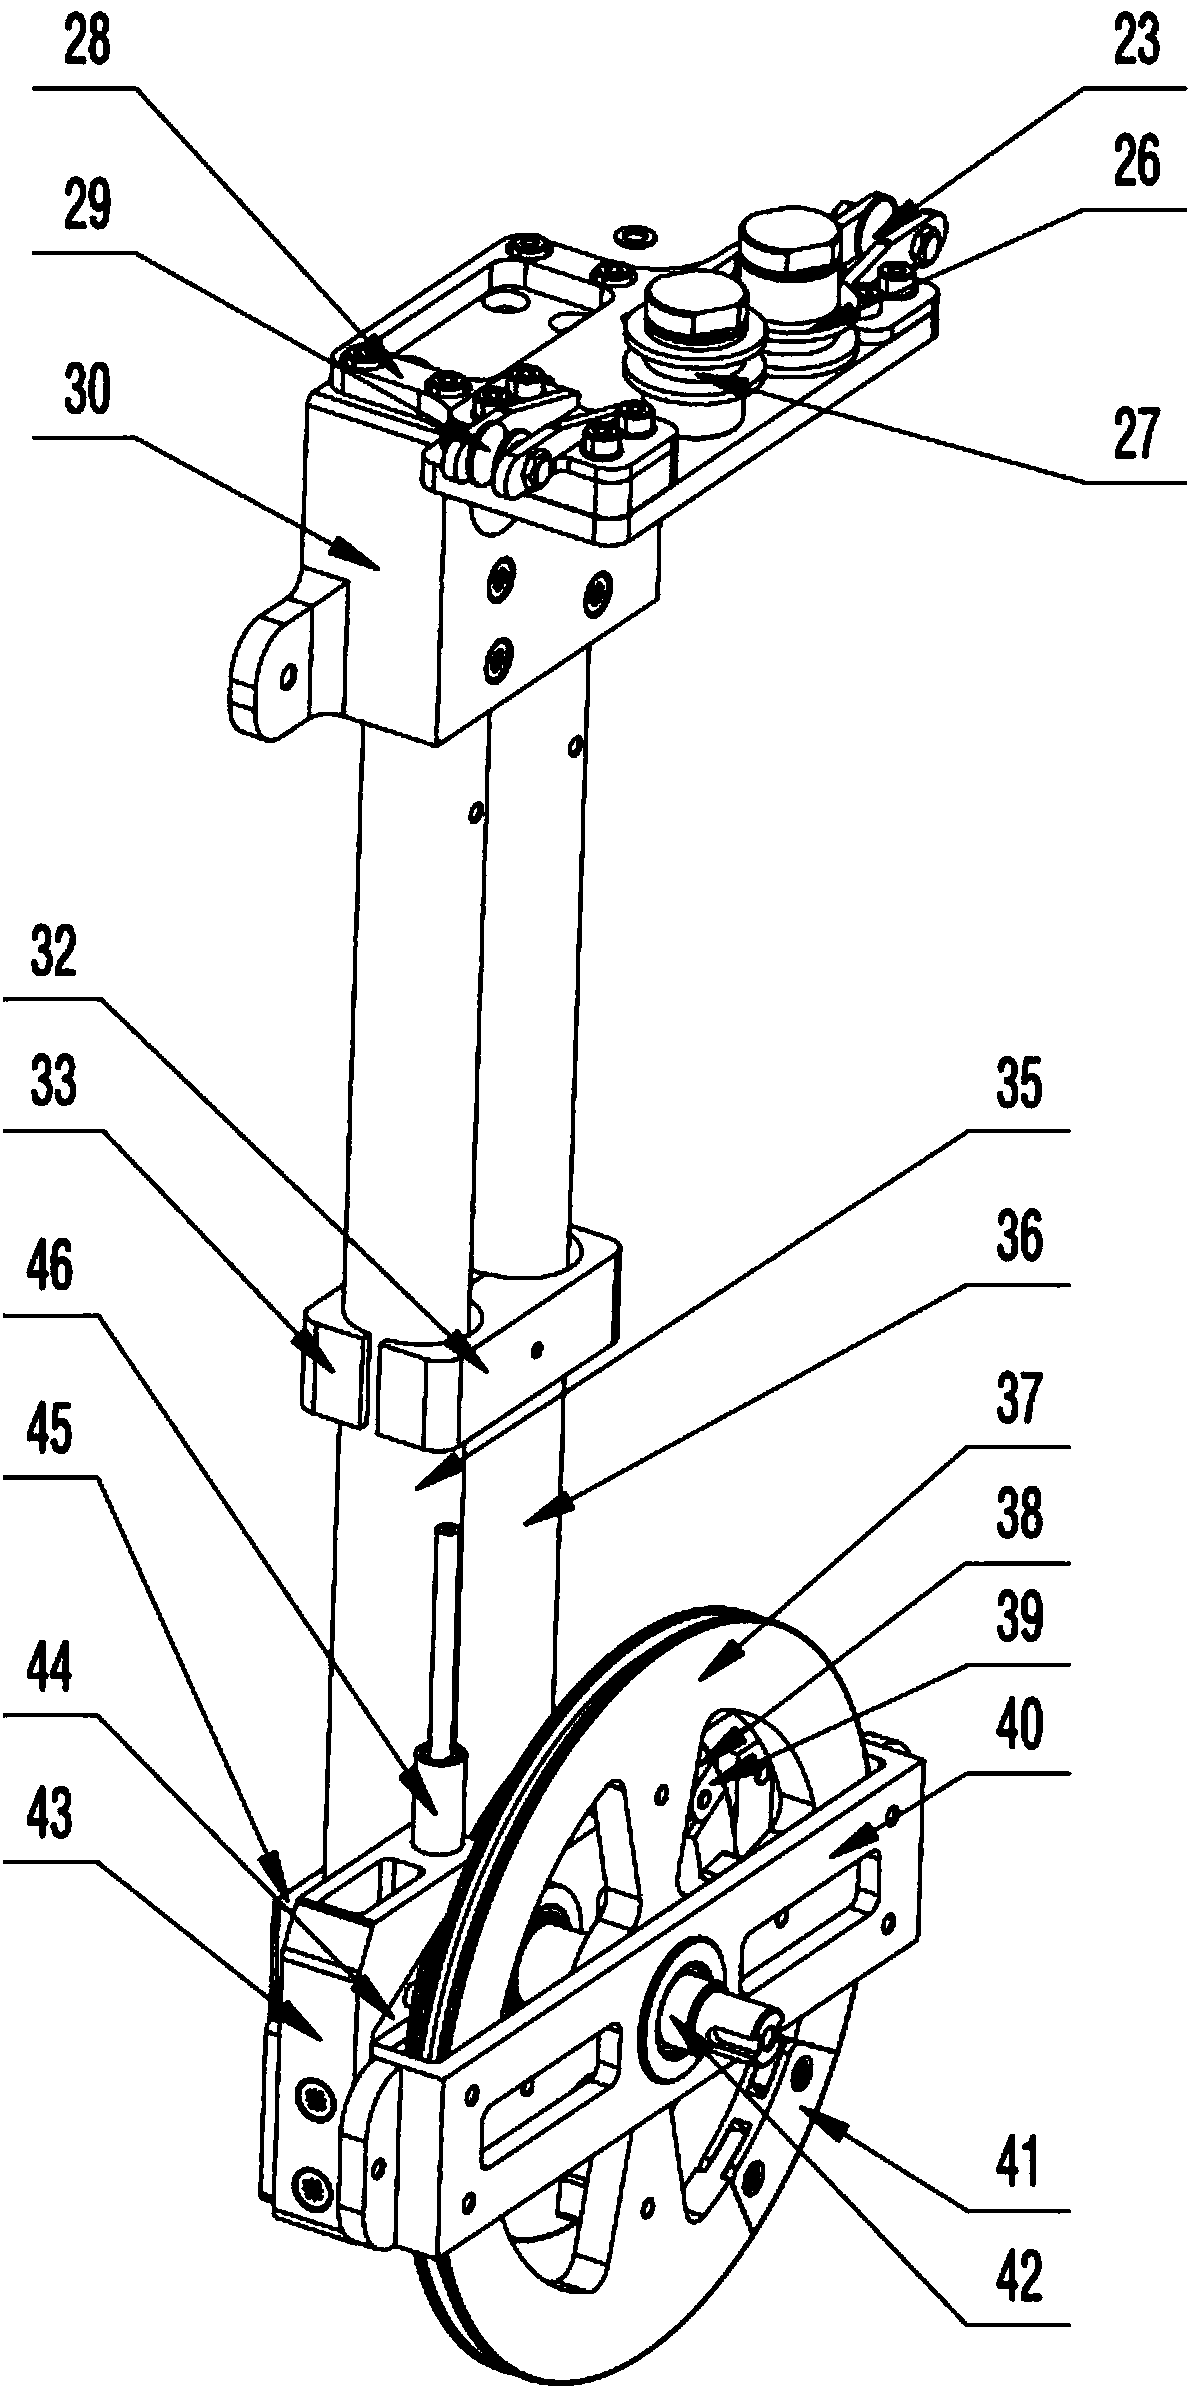 Coupled motion mechanism and shoulder joint rehabilitation training device with same